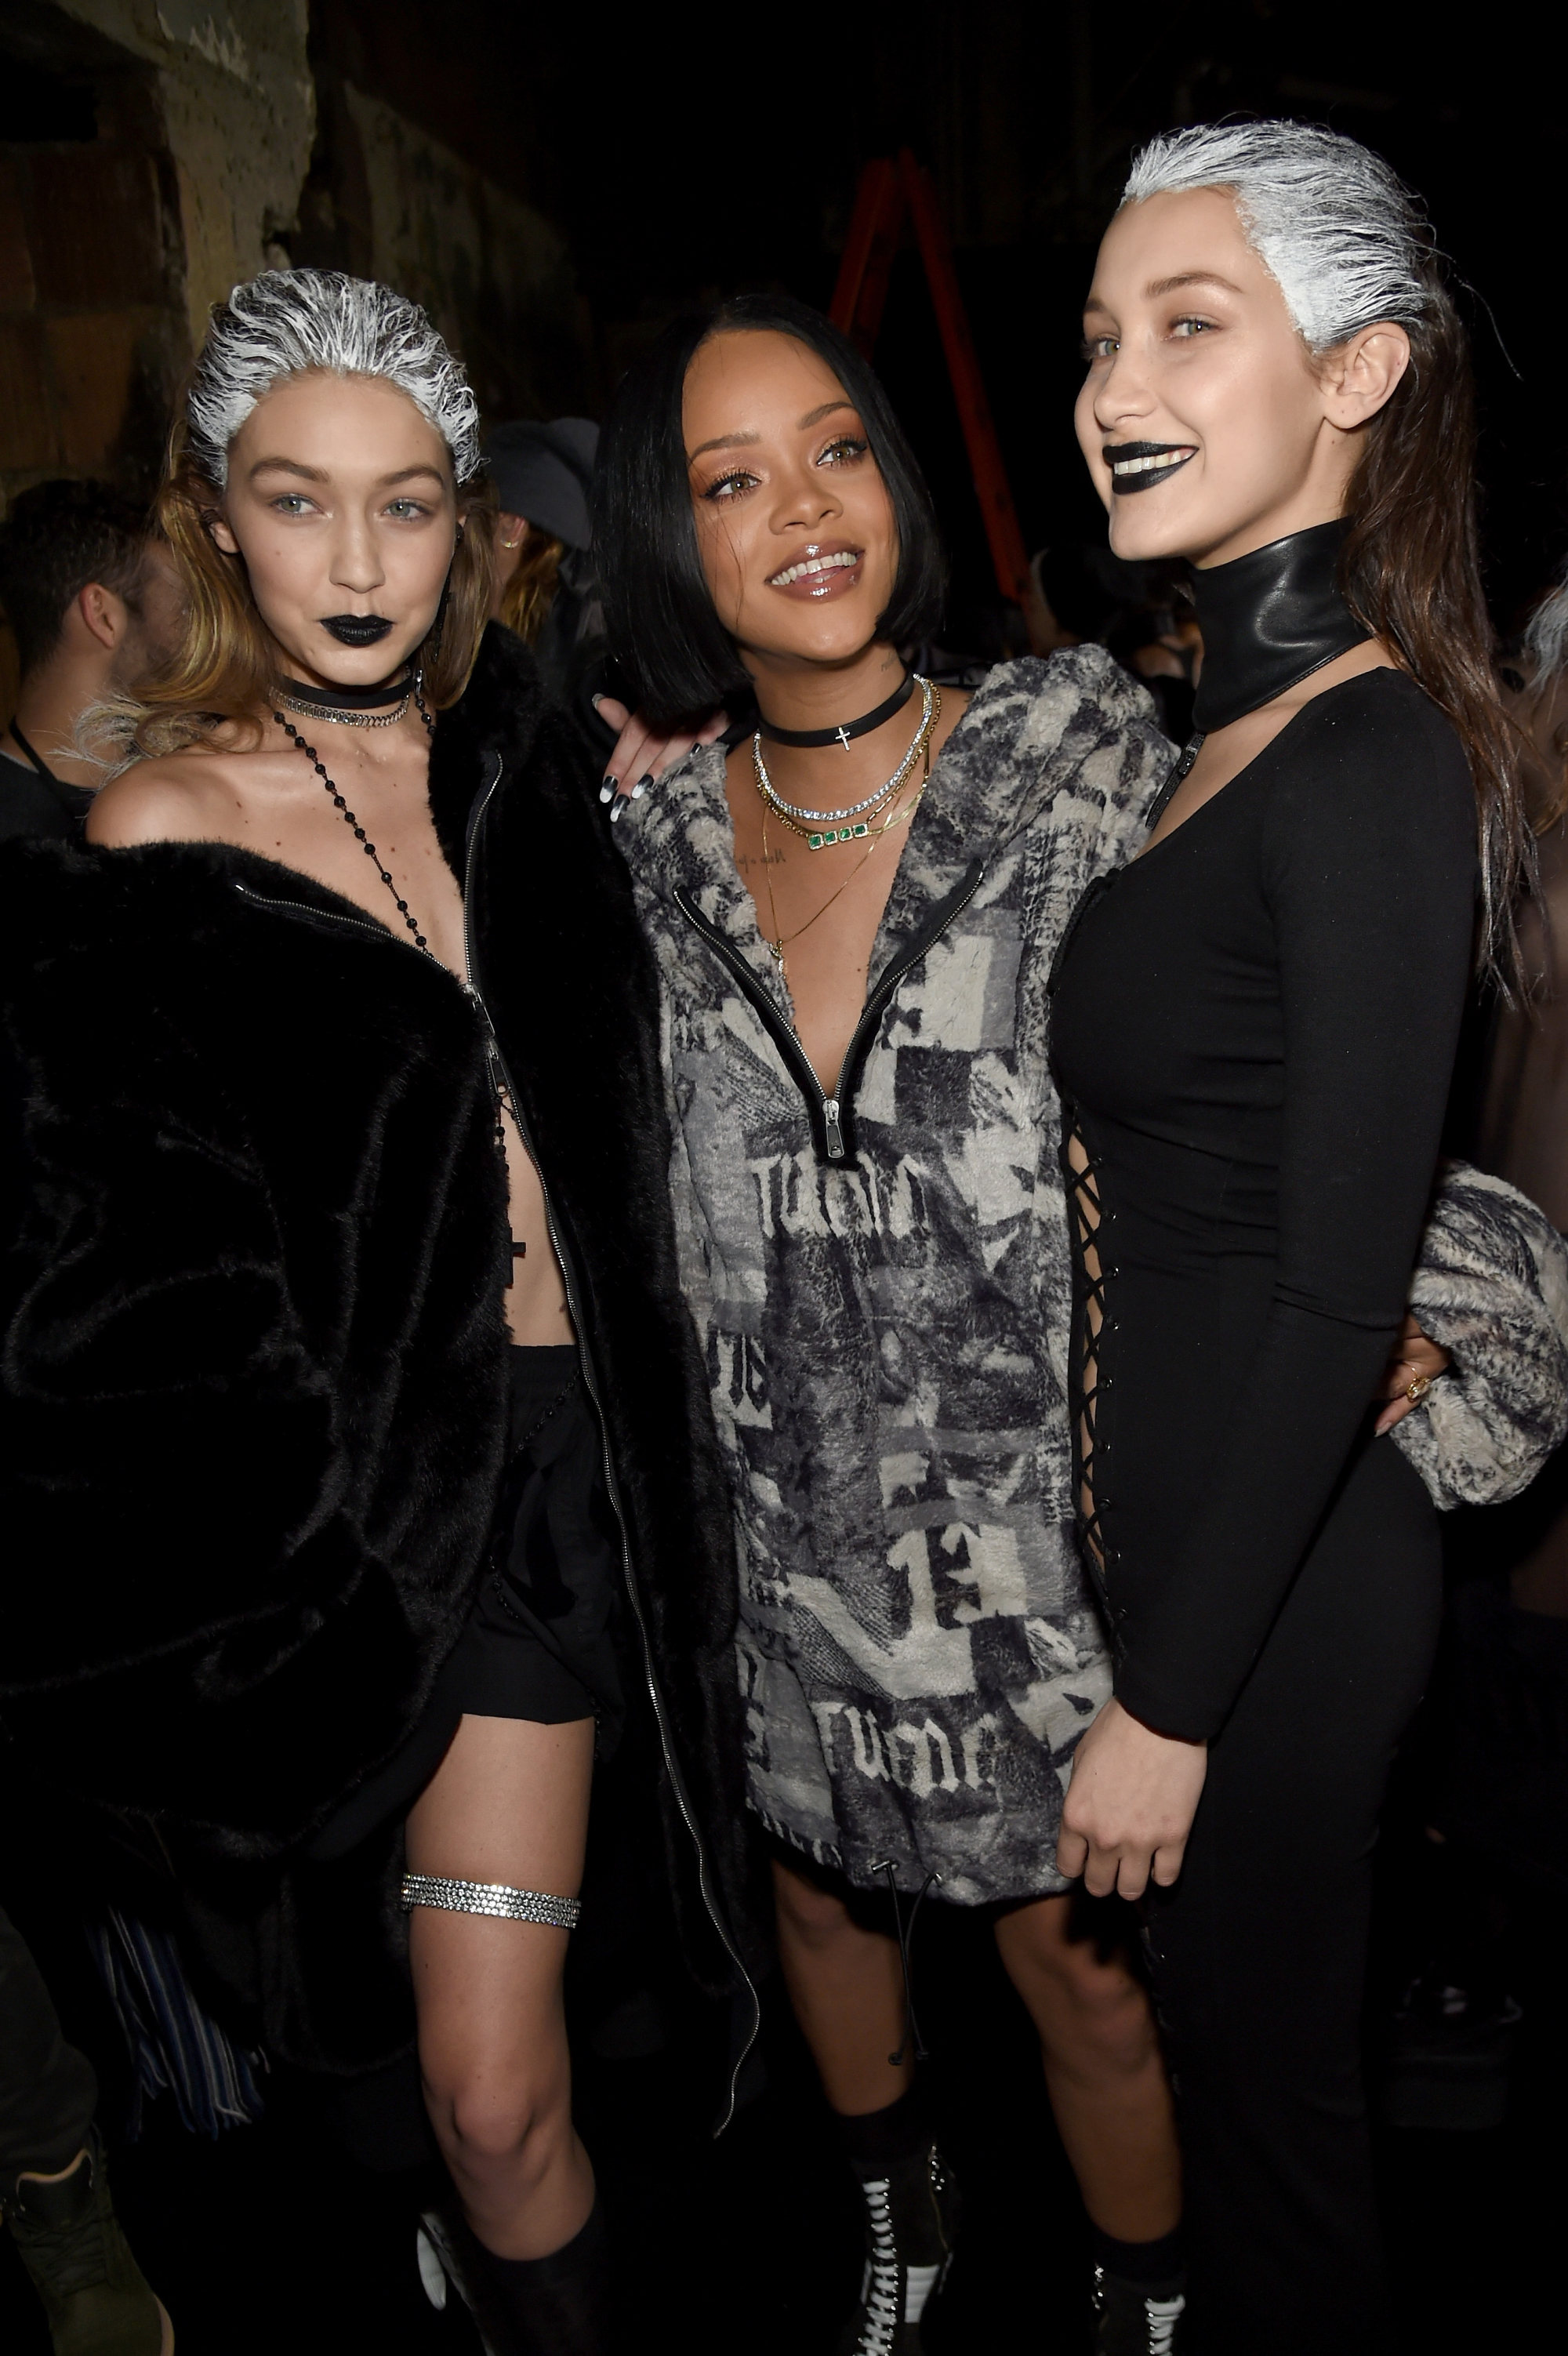 Gigi and Bella Hadid's 10 best matching fashion looks: the supermodel  sisters stunned in Versace dresses, gothic Fenty X Puma by Rihanna looks  and Victoria's Secret lingerie …